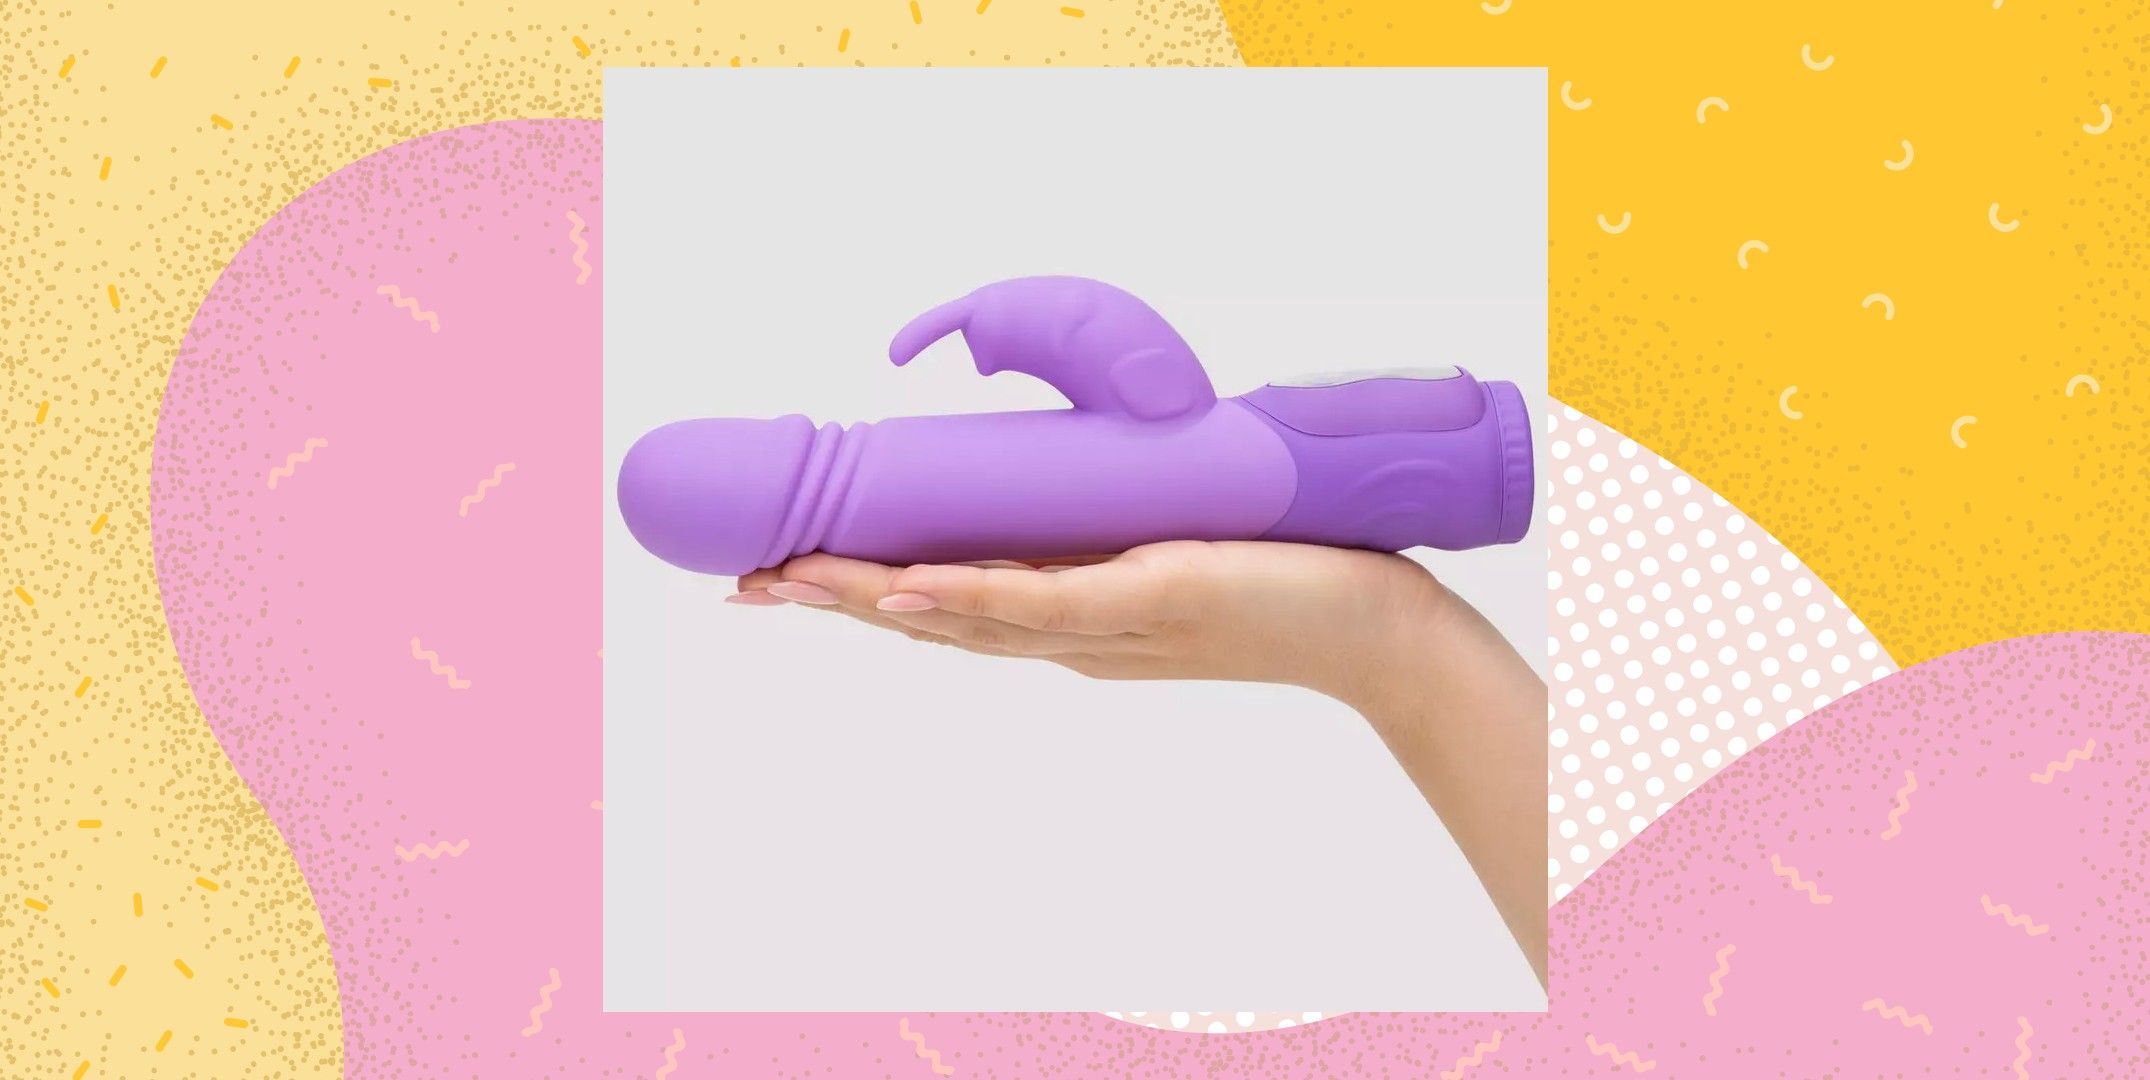 Best sex toys for women to shop UK 2022